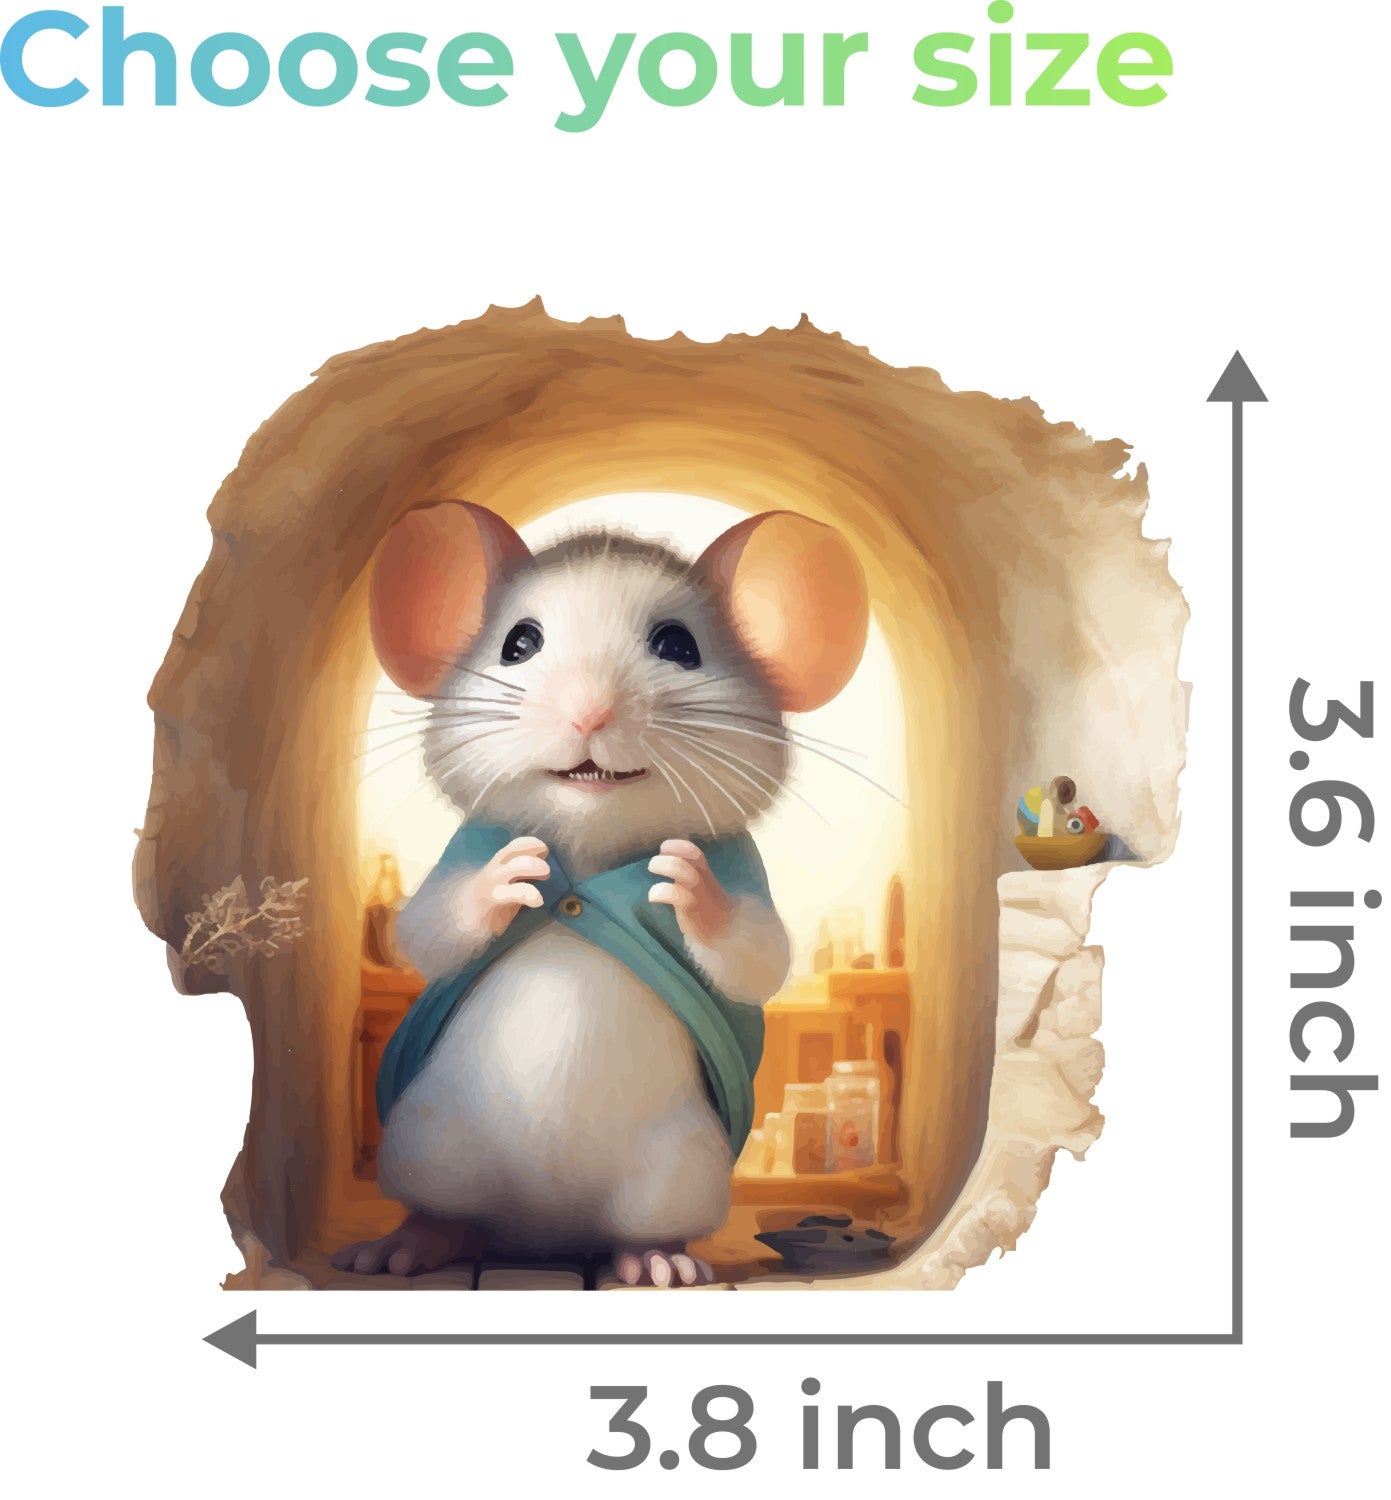 Mouse Hole Wall Sticker